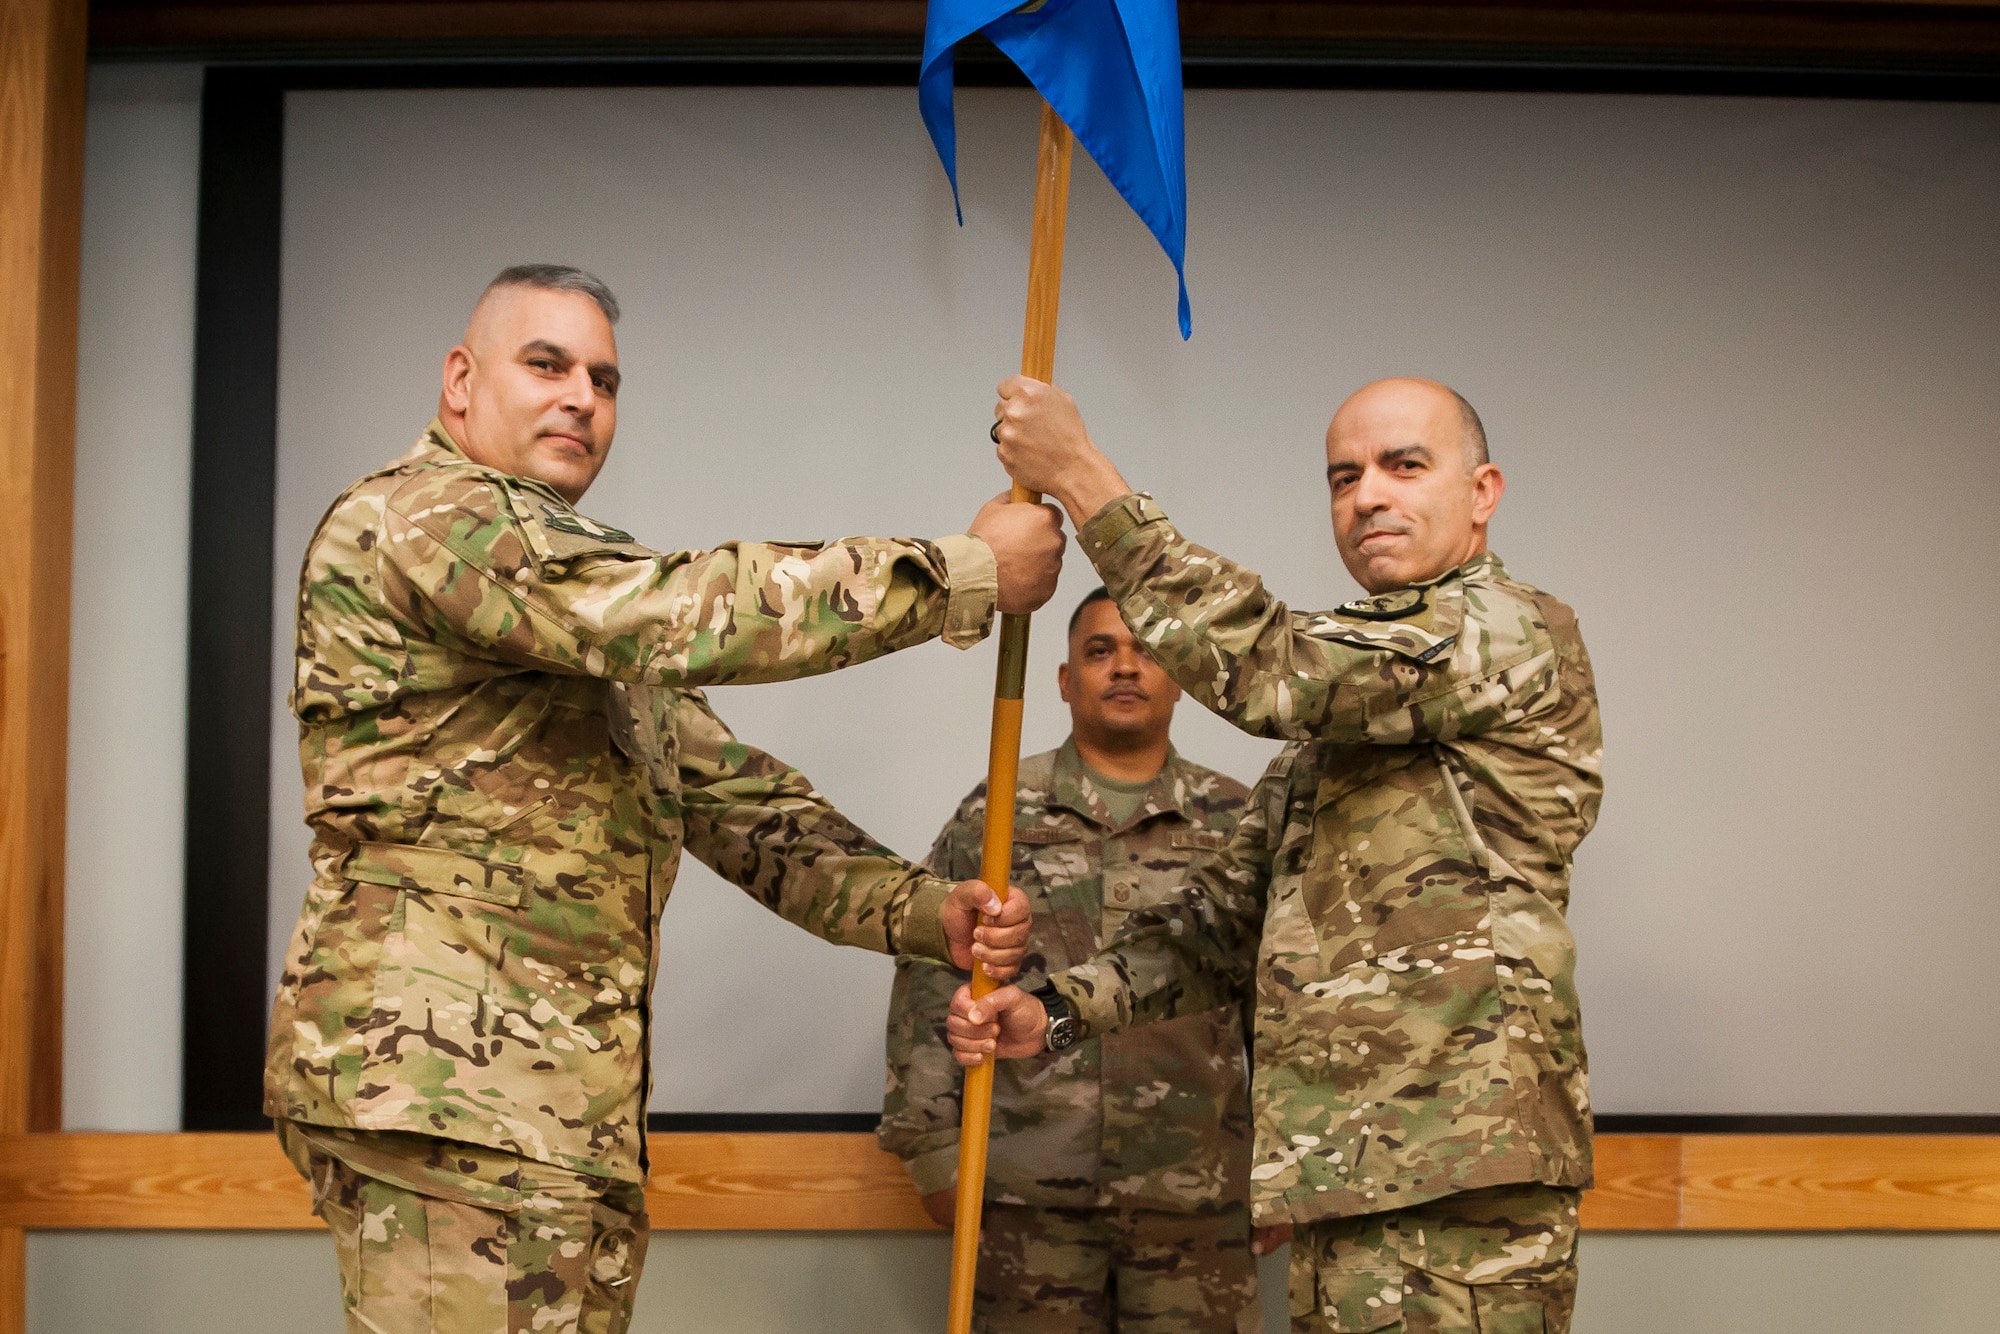 Lt. Col. Michael LoForti, 920th Operations Group commander, passes the unit’s guidon to the new 920th Operations Support Squadron Maj. Ricardo Montana during a change of command ceremony at Patrick Air Force Base, Florida, Oct. 13, 2018. During the ceremony the squadron’s Airmen sent off Lt. Col. Scott Nichols, the previous 920th OSS, to the 301st Rescue Squadron. (U.S. Air Force photo by Tech. Sgt. Jared Trimarchi)